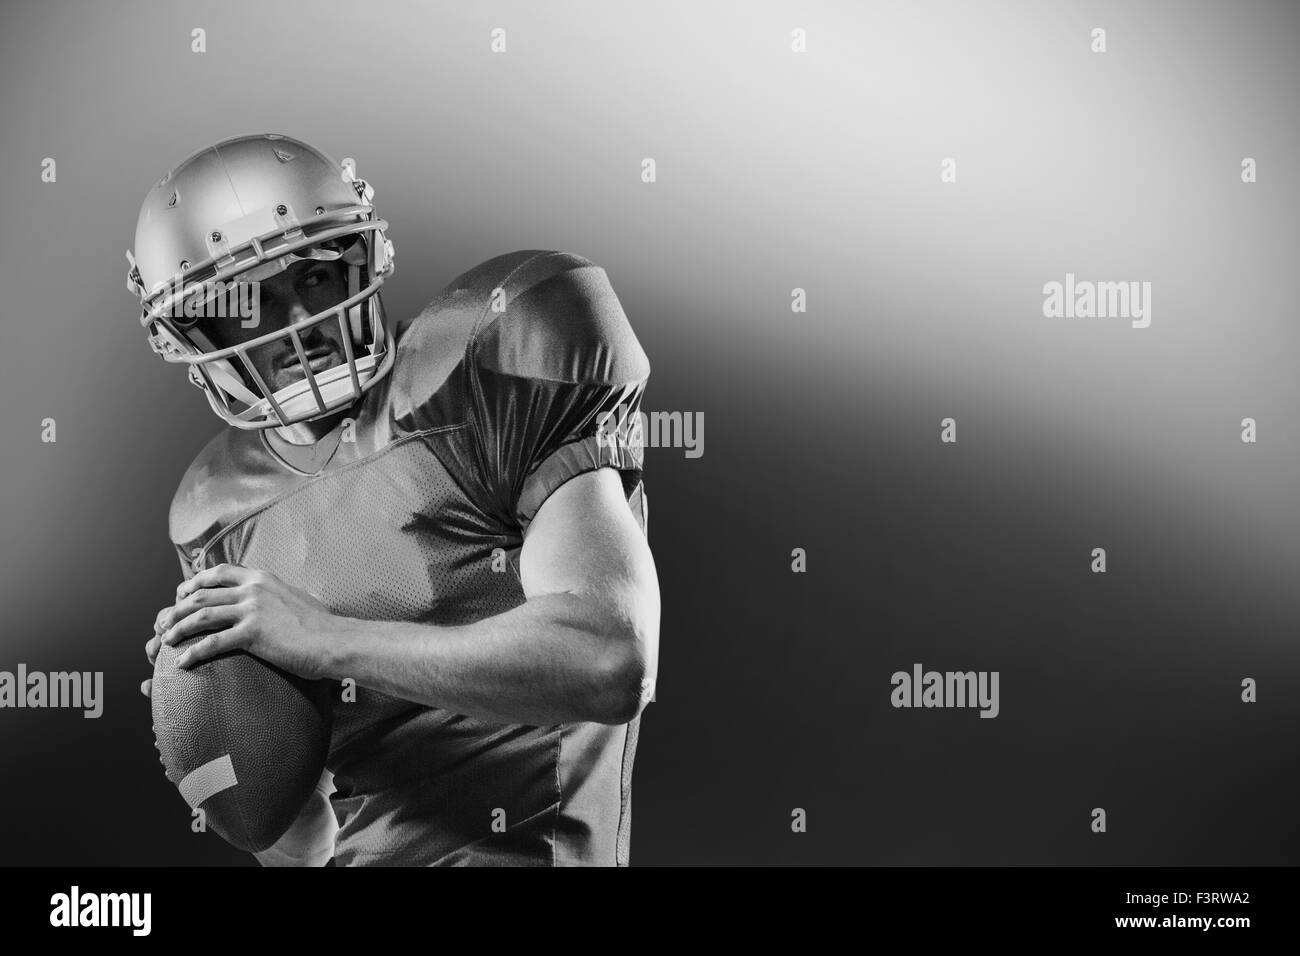 American football player in red jersey looking away while holding ball Stock Photo